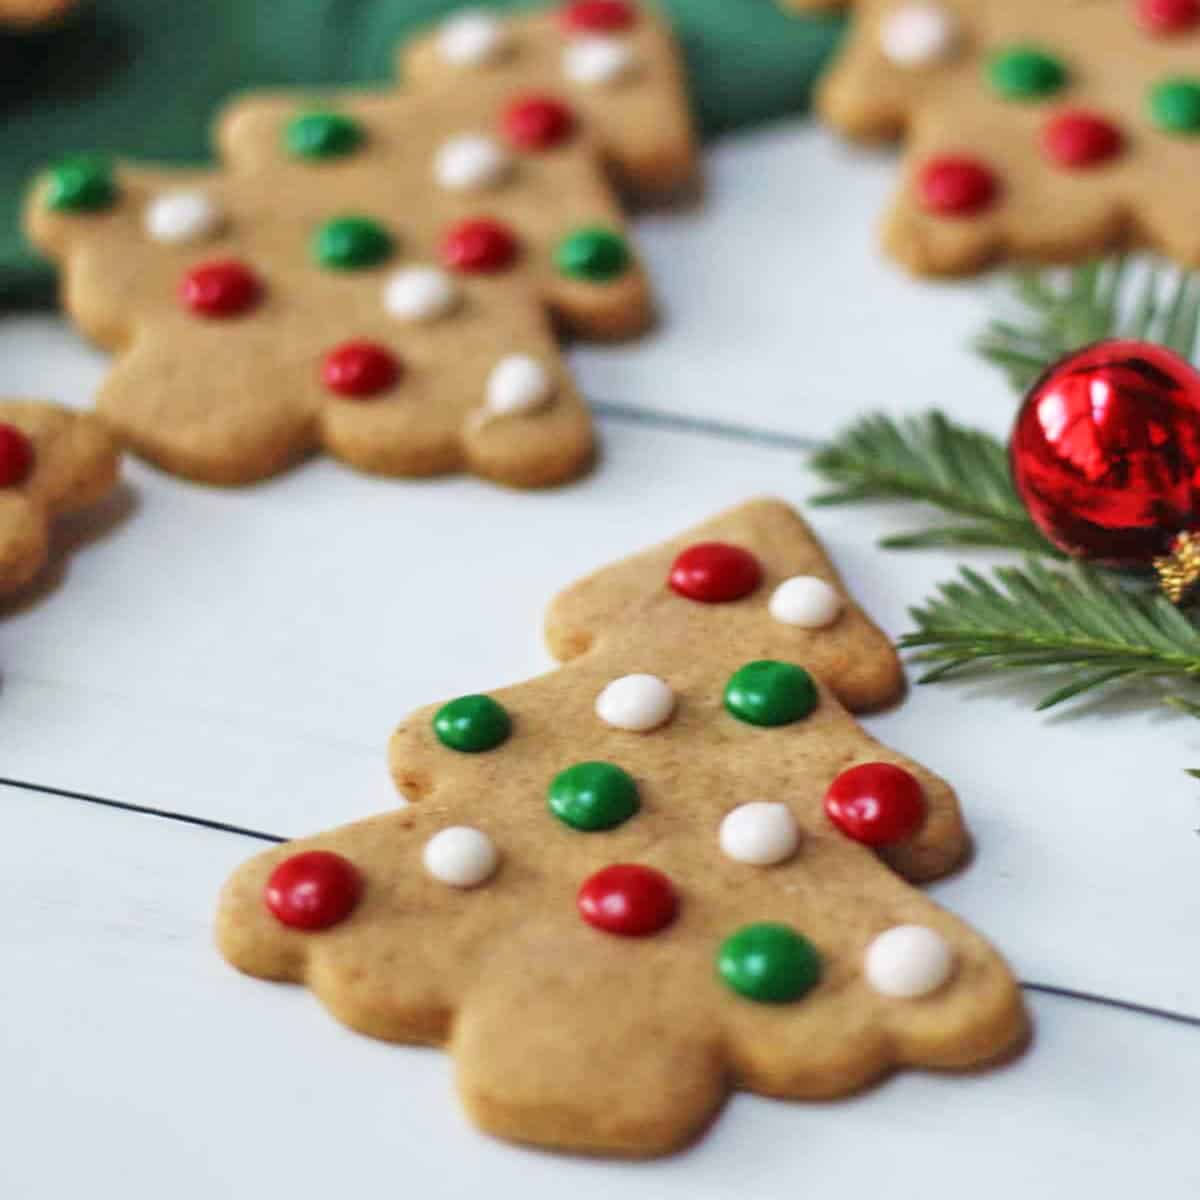 A group of Christmas tree-shaped cookies.